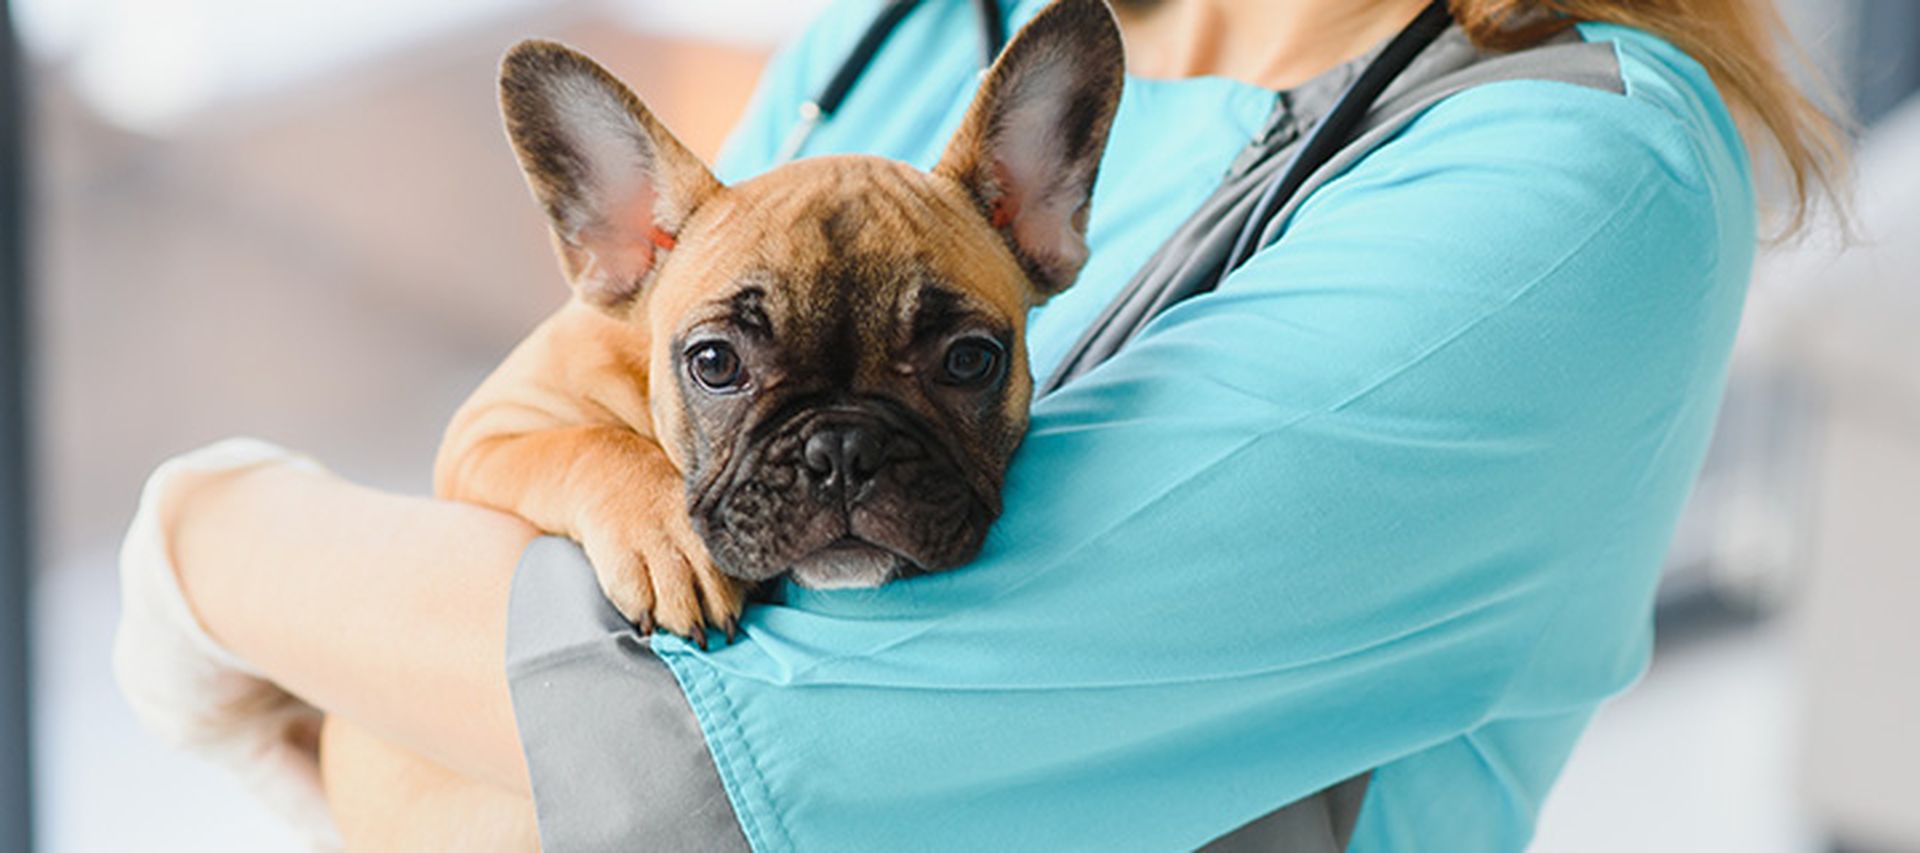 A puppy carried in the arms of a veterinarian.